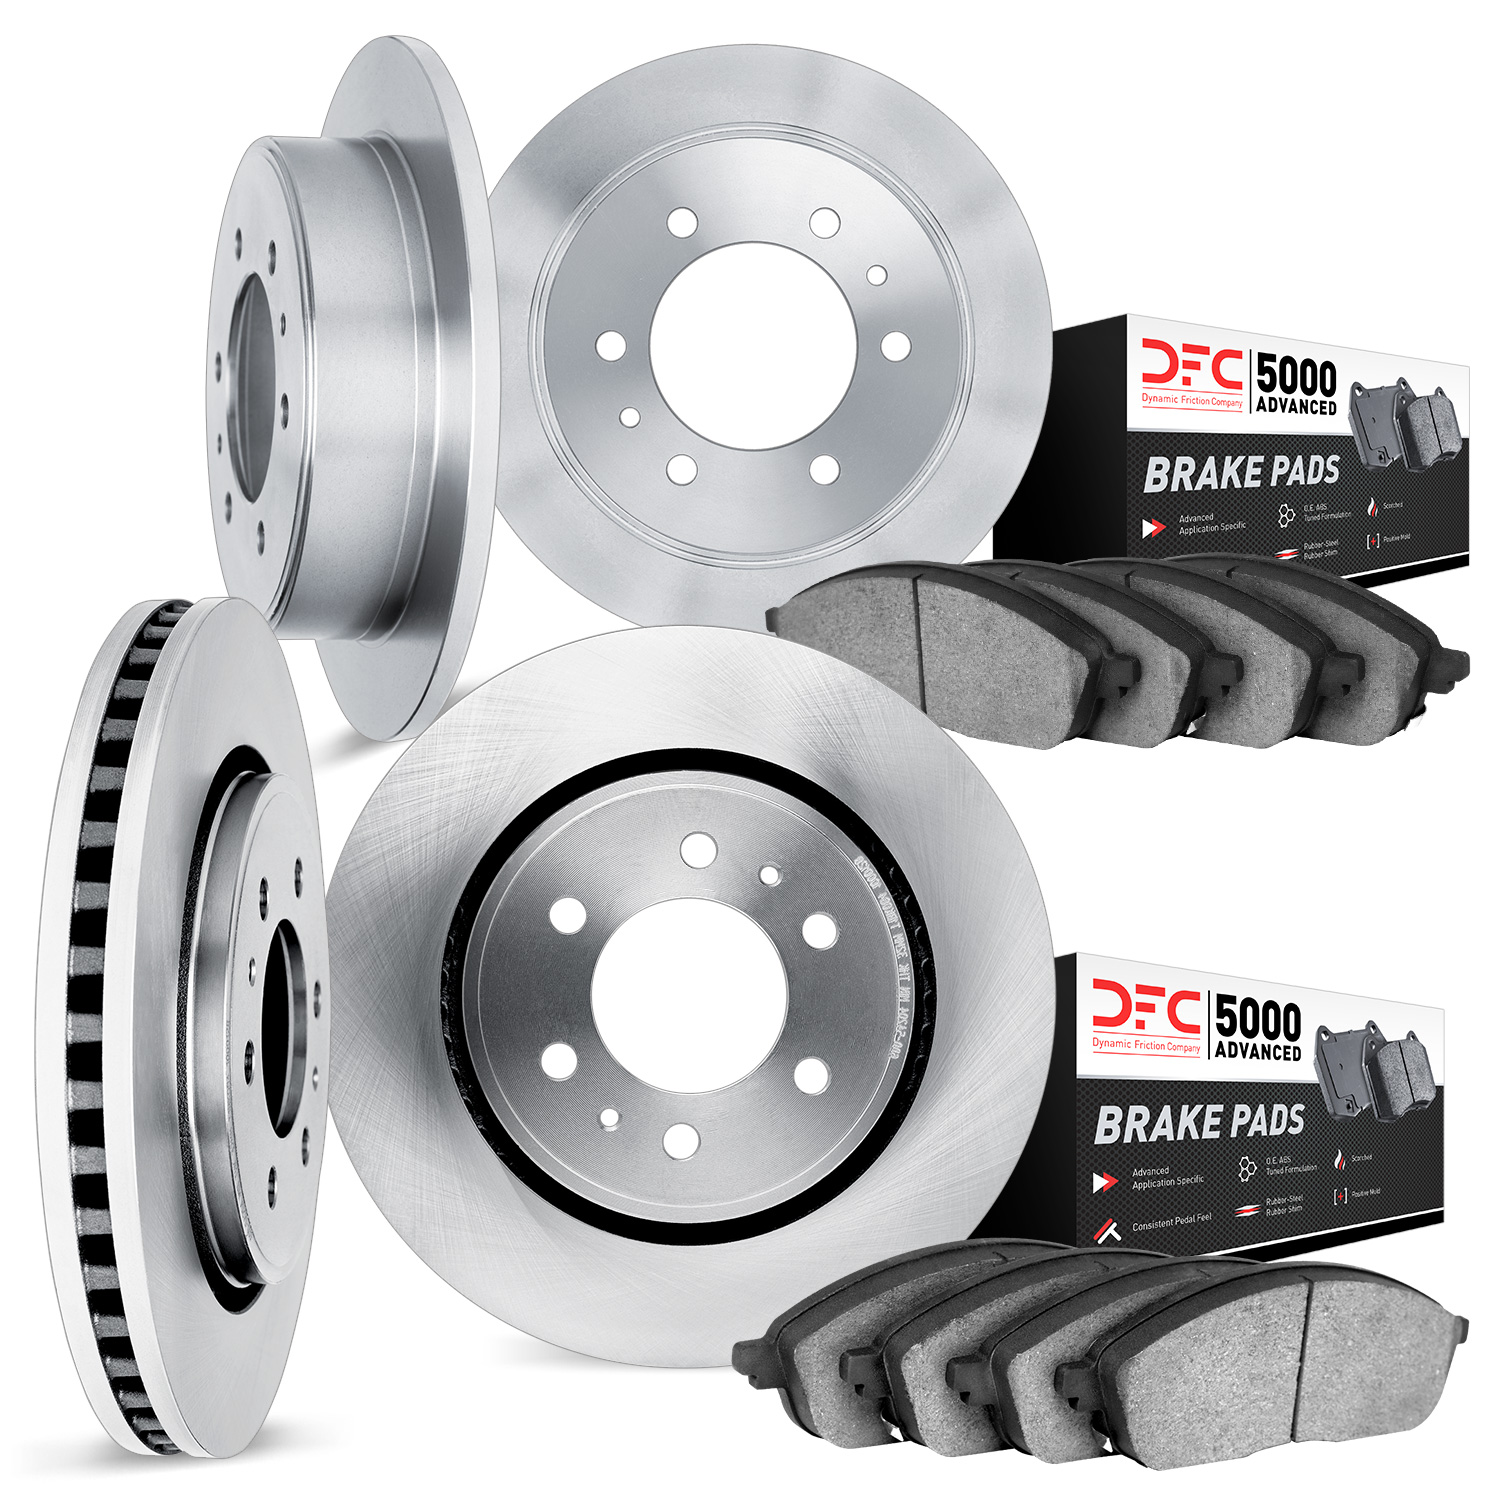 6504-93001 Brake Rotors w/5000 Advanced Brake Pads Kit, 2006-2010 GM, Position: Front and Rear